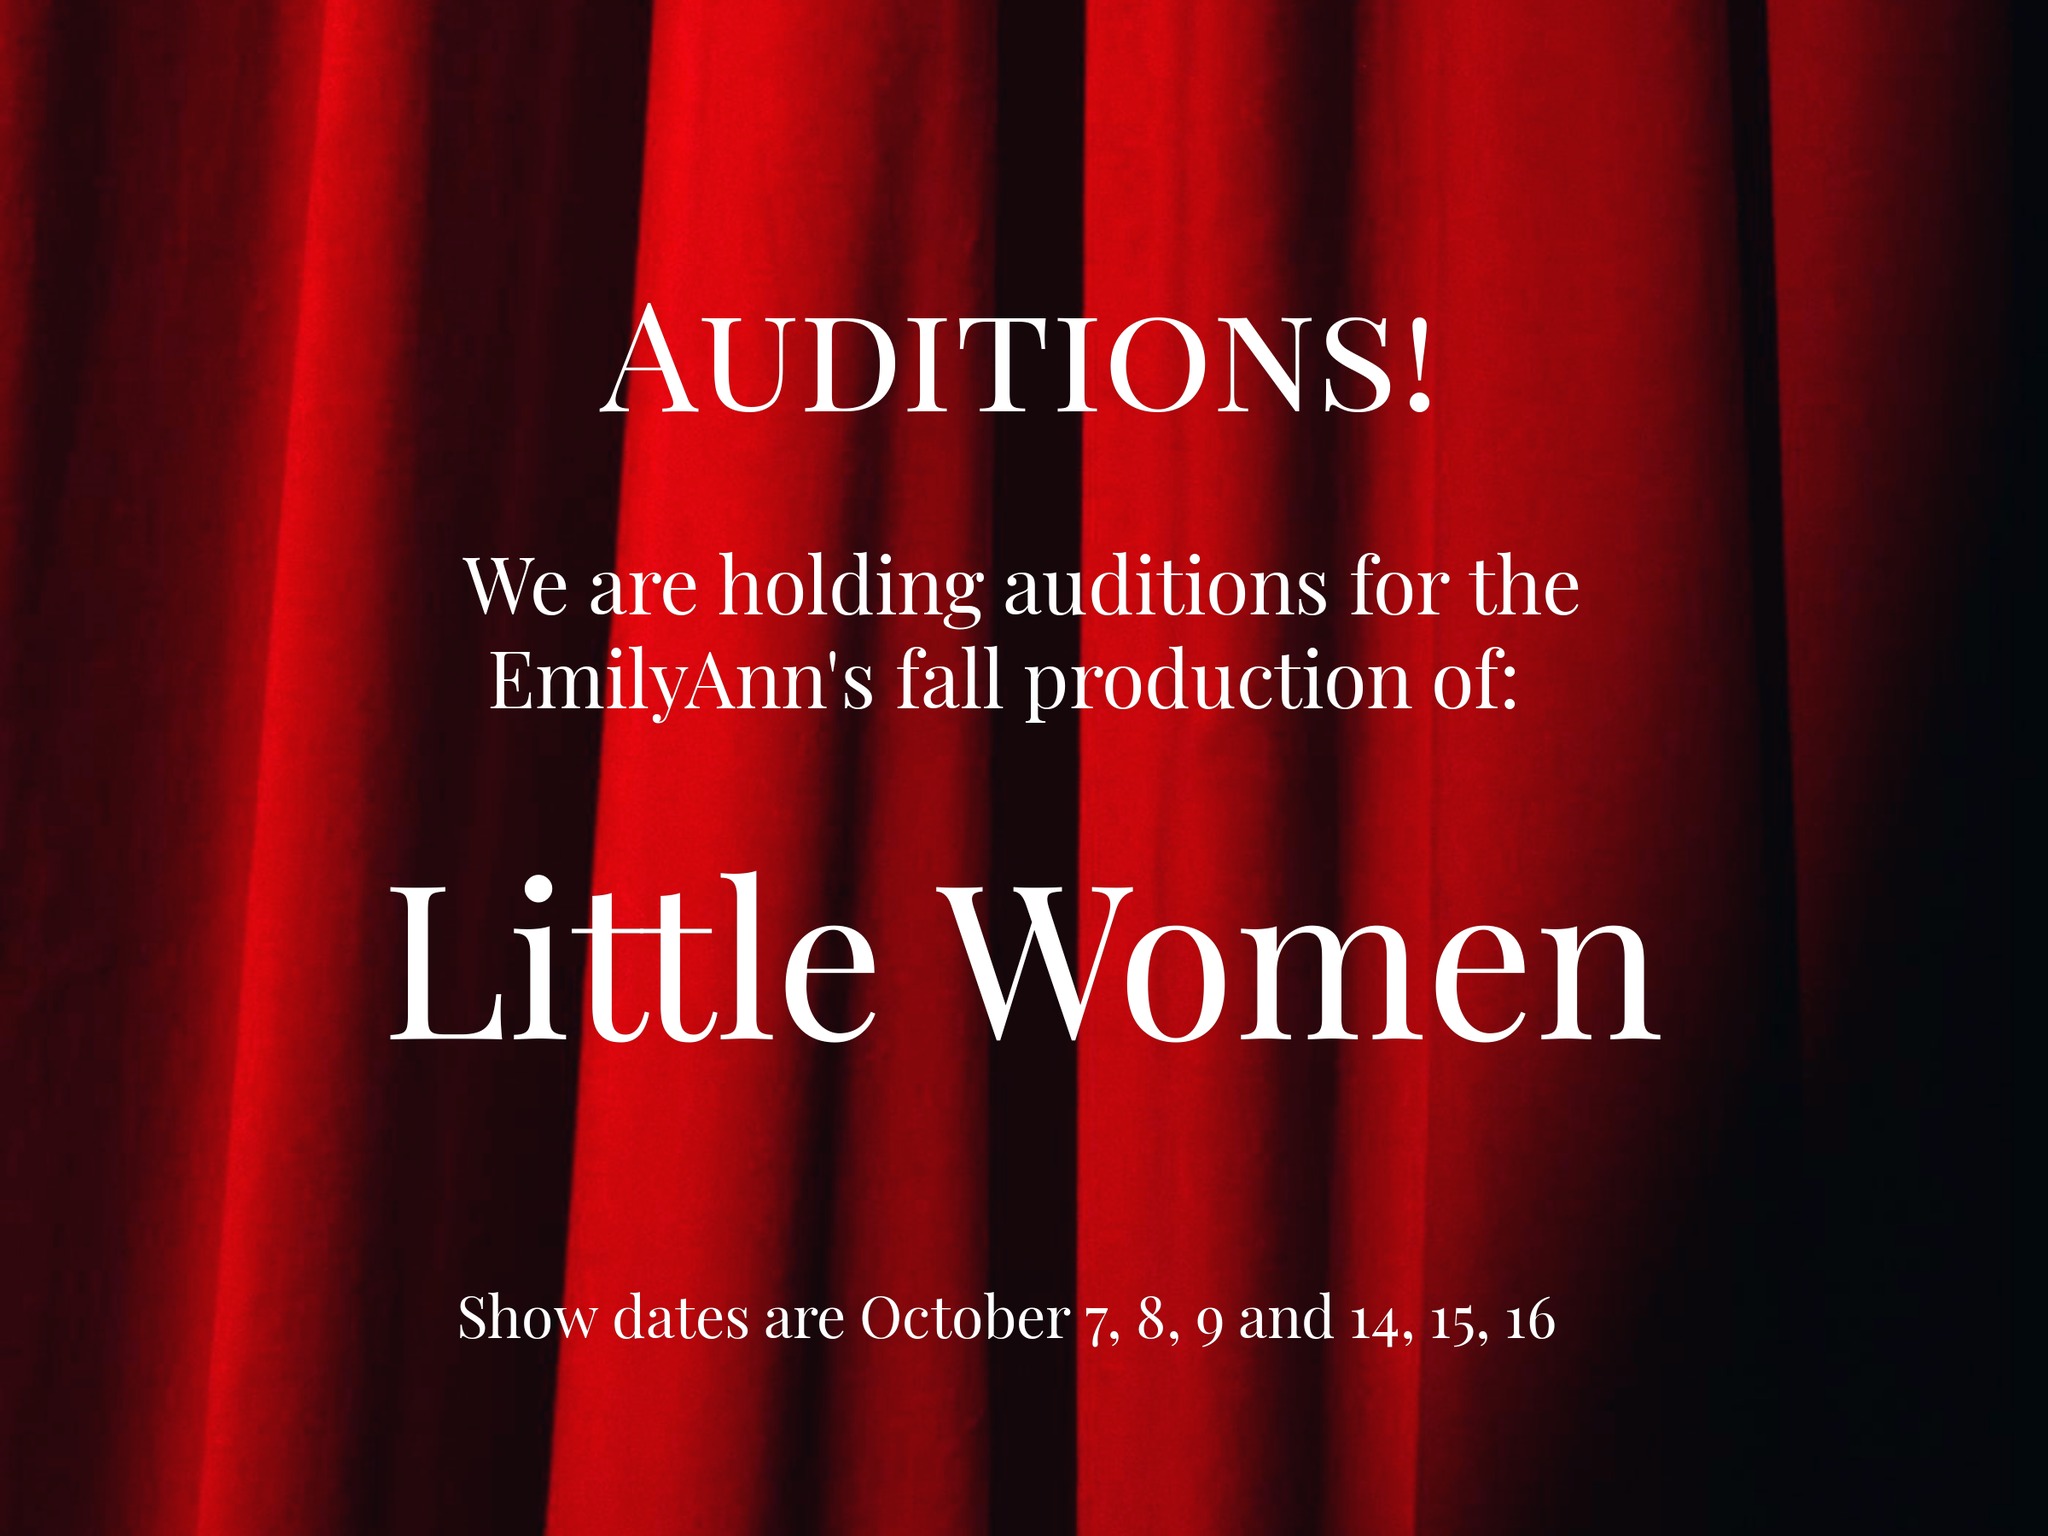 Auditions for Little Women, by Emily Ann Theatre, Wimberley